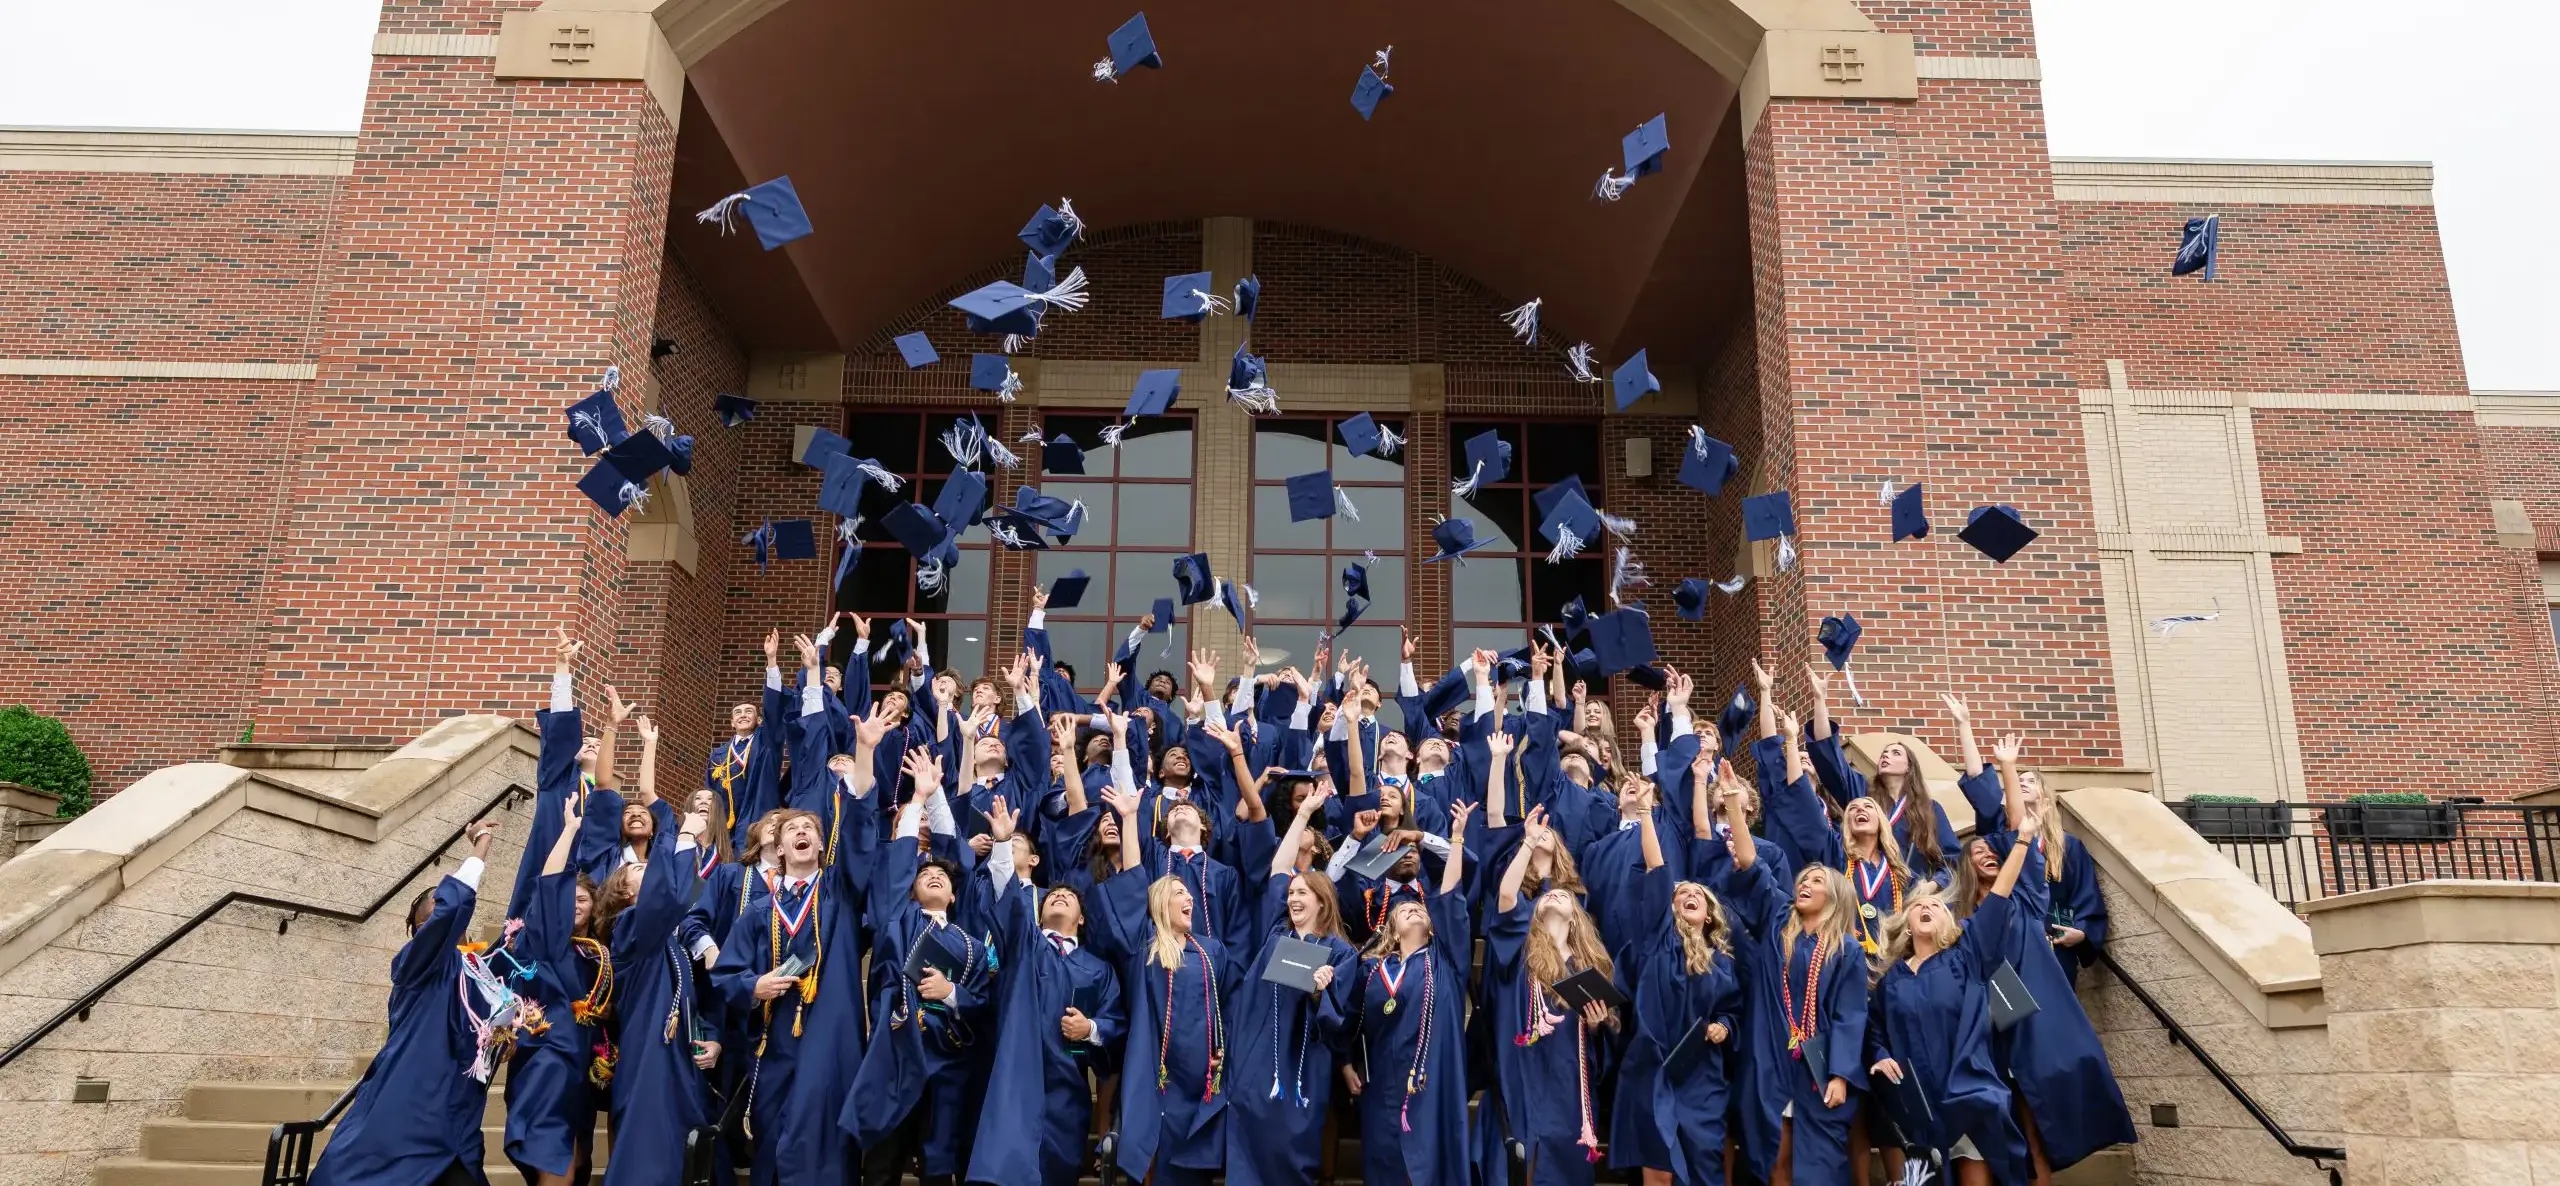 Students tossing graduation gaps in the air, standing on steps